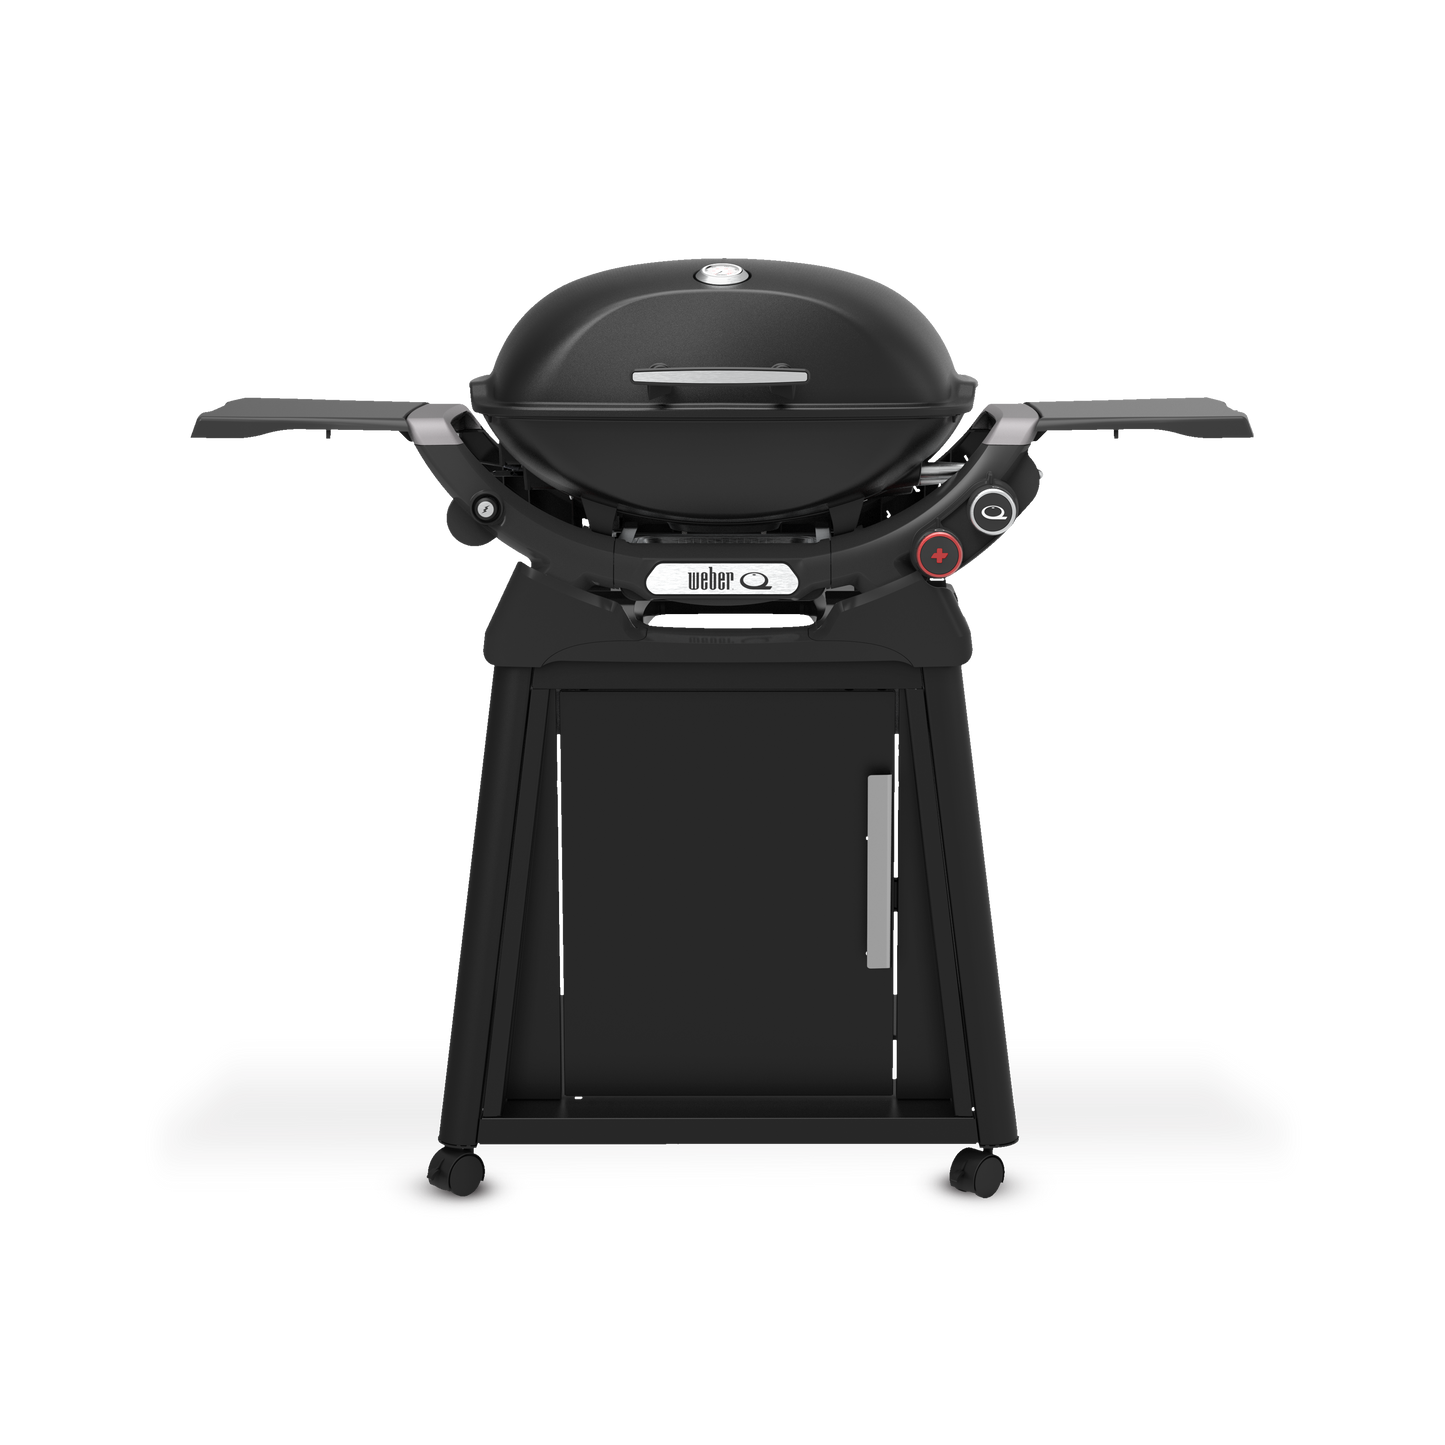 Weber Q 2800N+ Propane Gas Grill with Stand